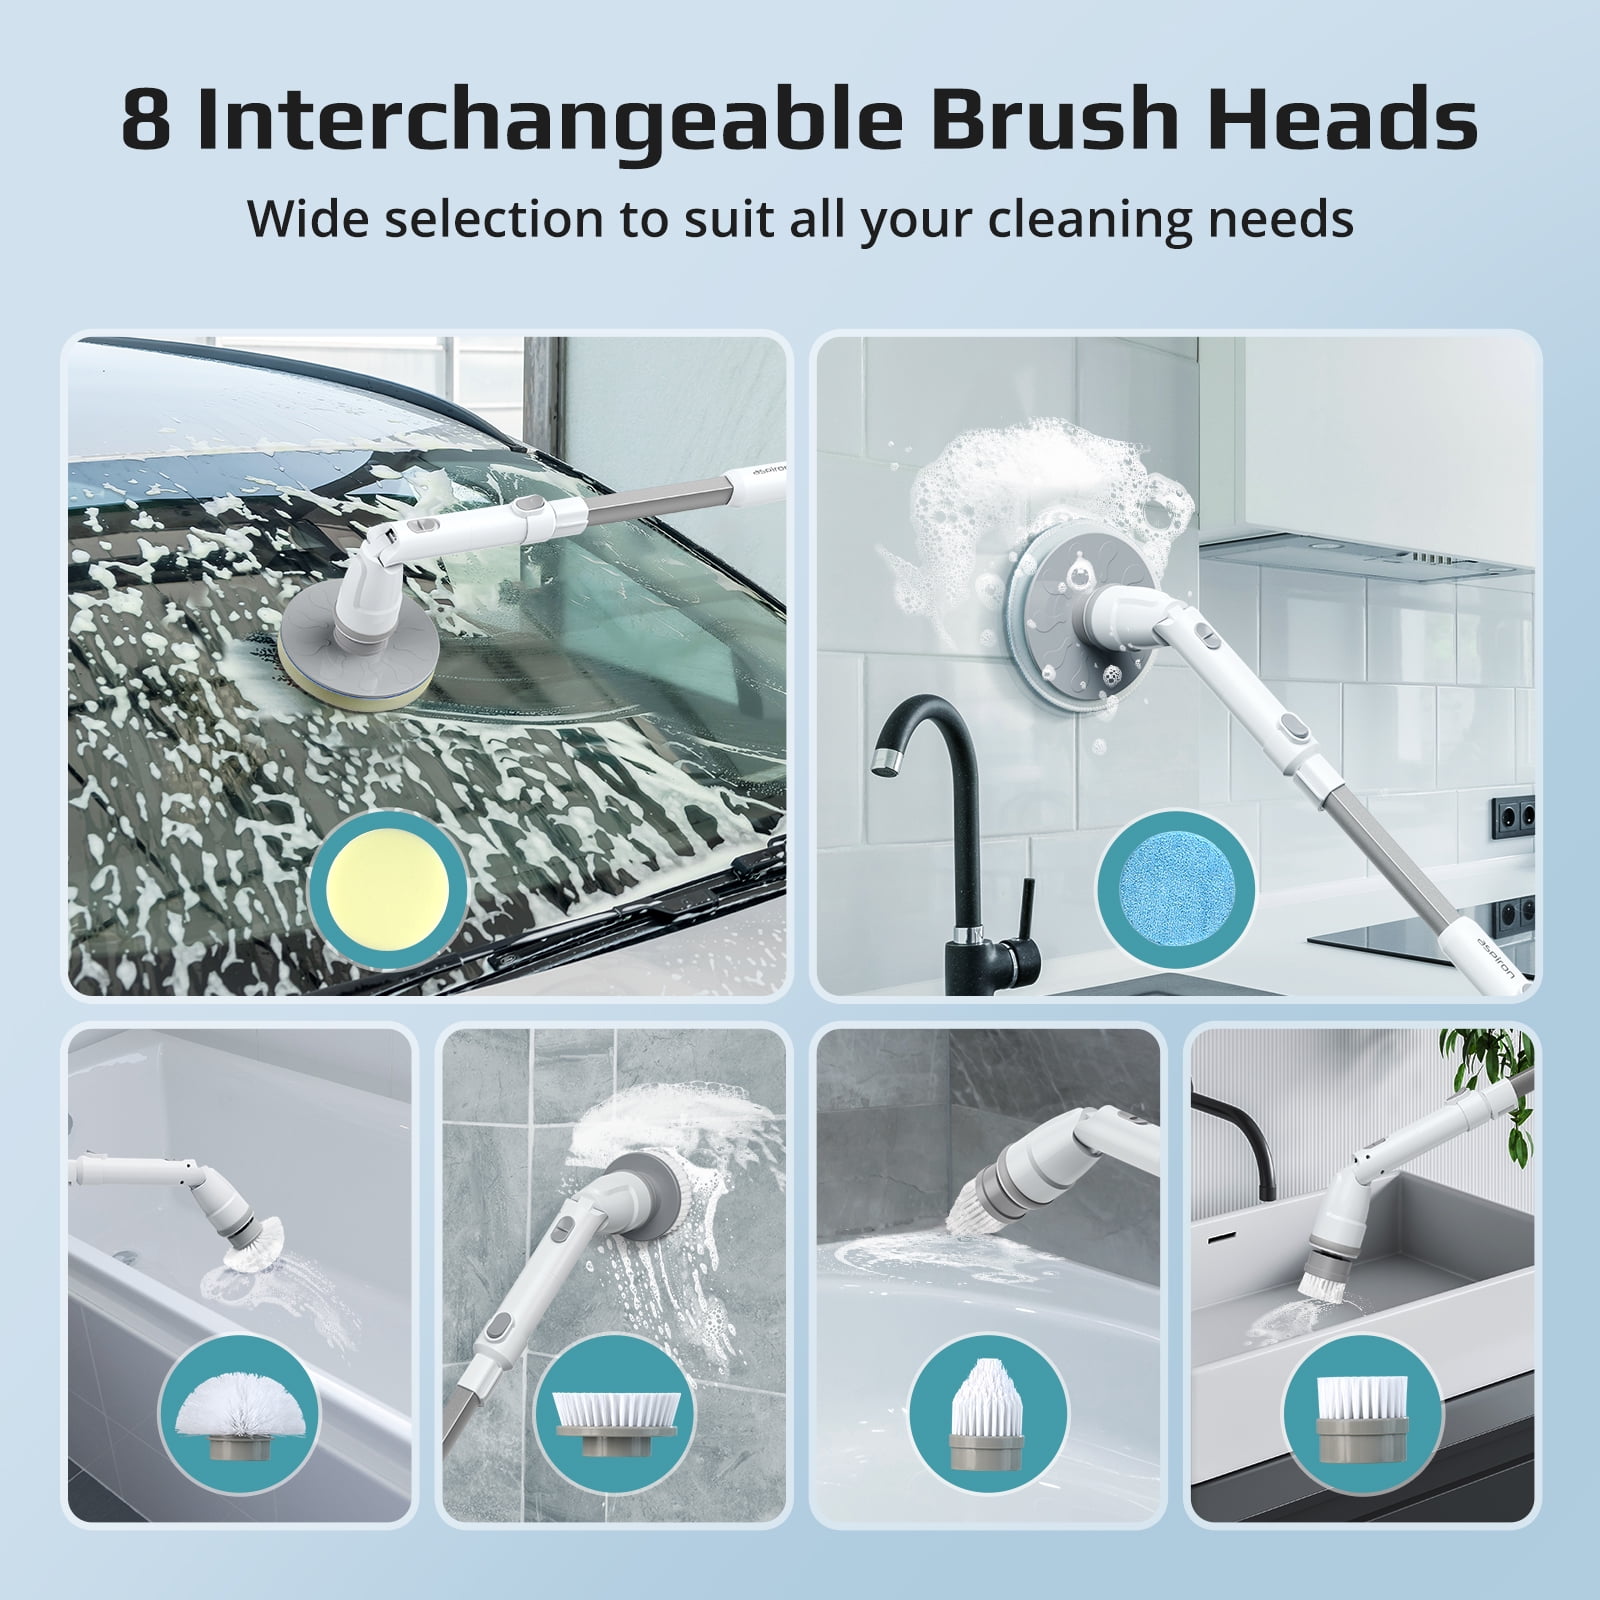 Anself Electric Spin Scrubber Cordless Rechargeable Bathroom Scrubber Cleaning Brush with 3 Replaceable Brush Heads Extension Handle for Tub, Tile